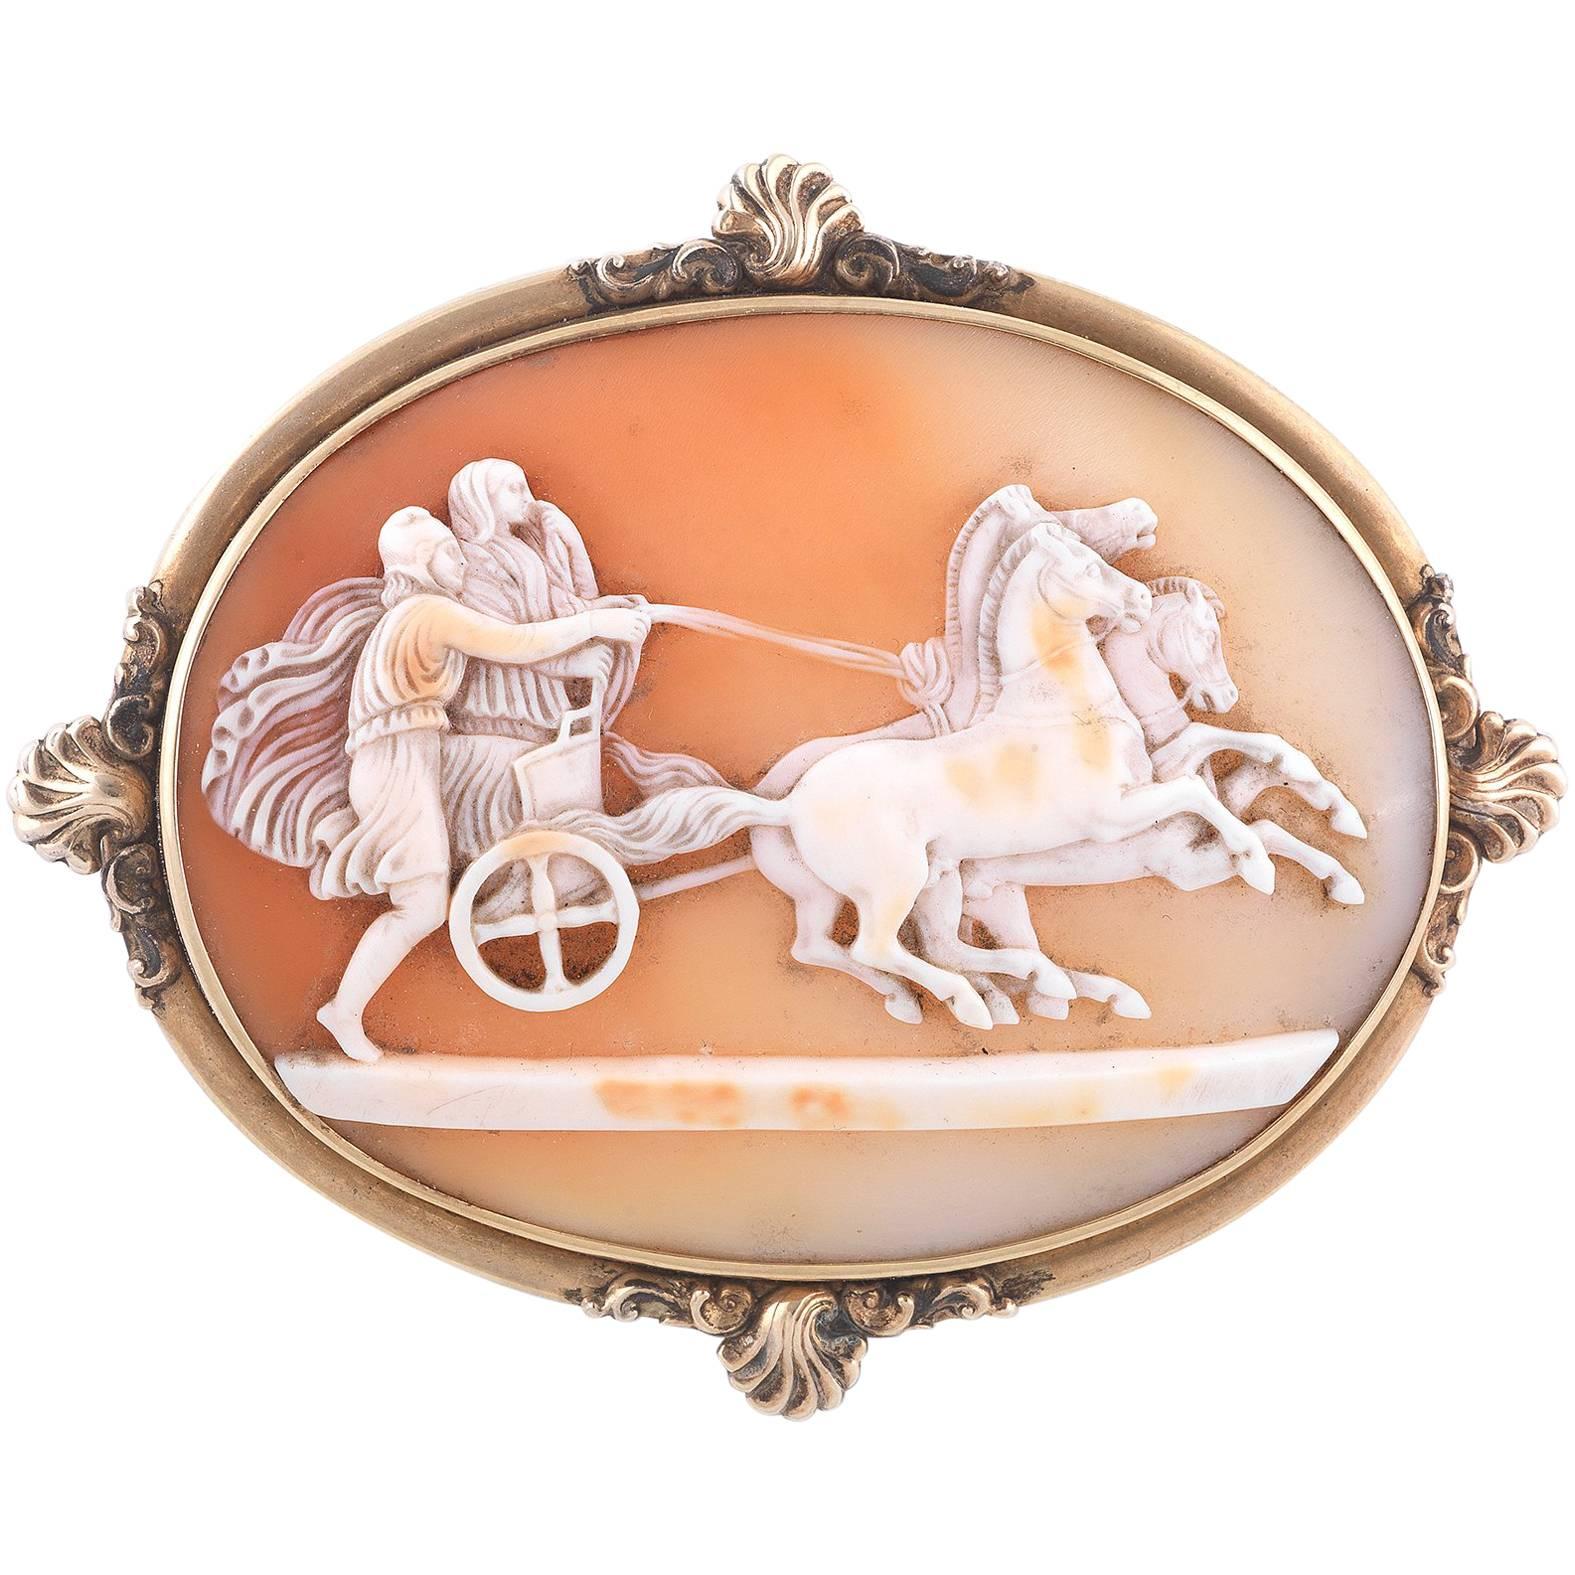 Shell Cameo Brooch Depicting Nike & Mars in Chariot Three Horses